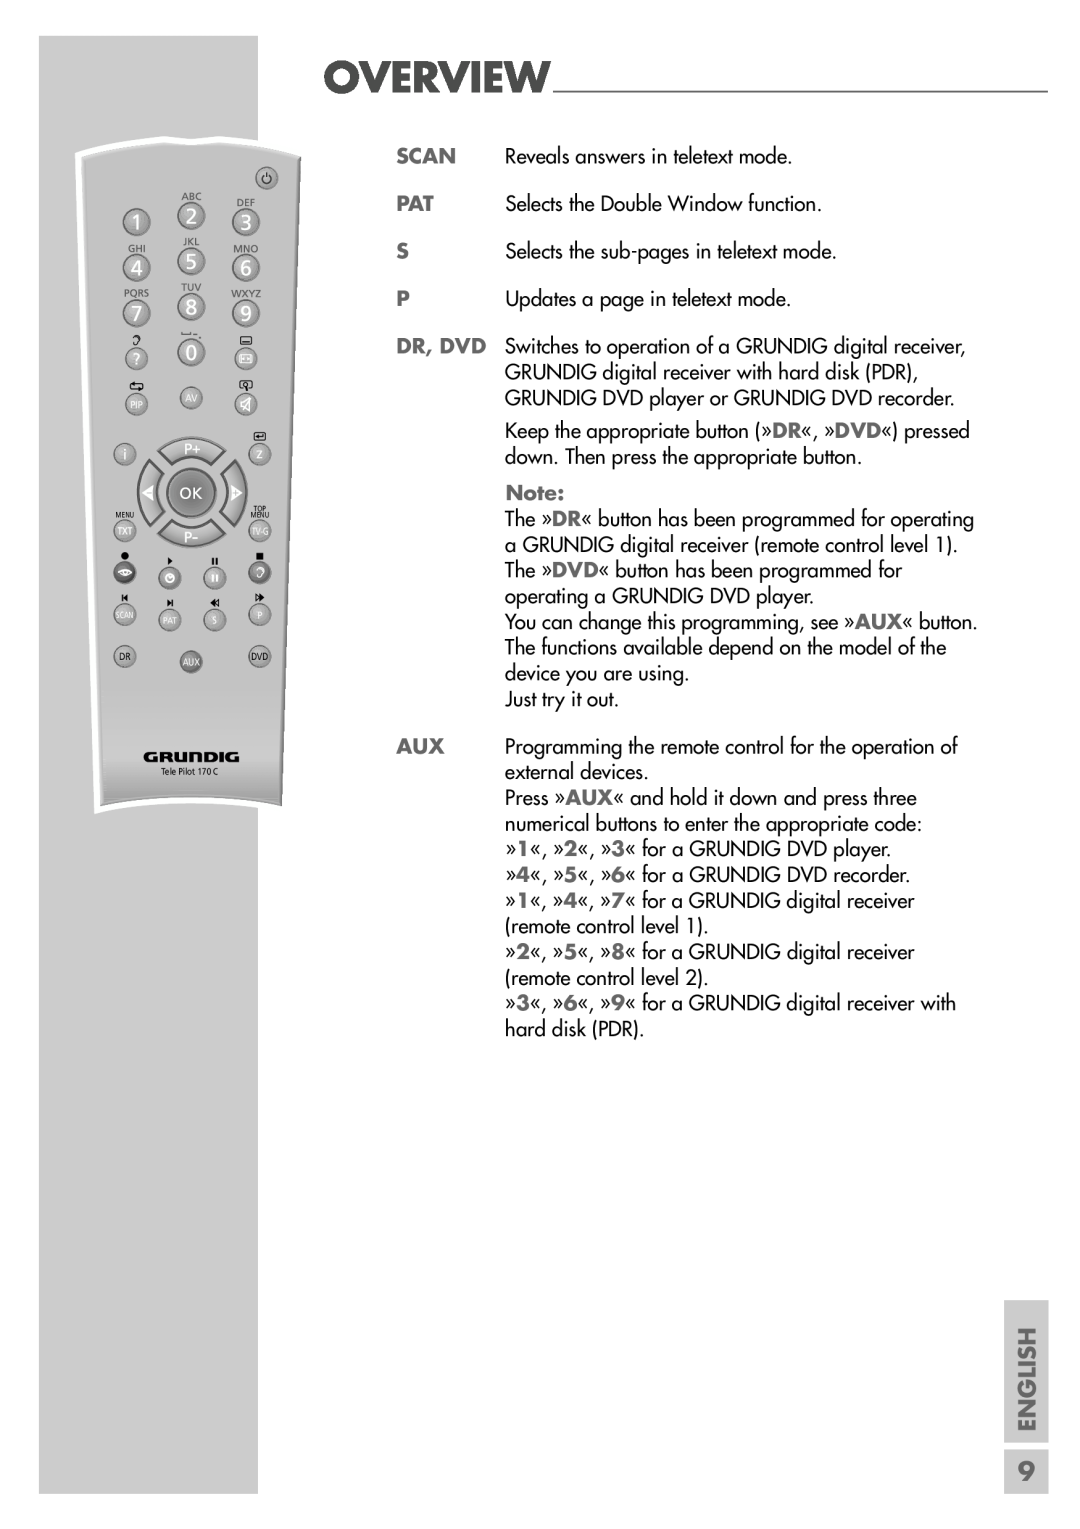 Grundig LXW 68-8720, LXW 82-8720 manual Overview, English, Scan, Dr, Dvd, Keep the appropriate button » DR«, » DVD« pressed 